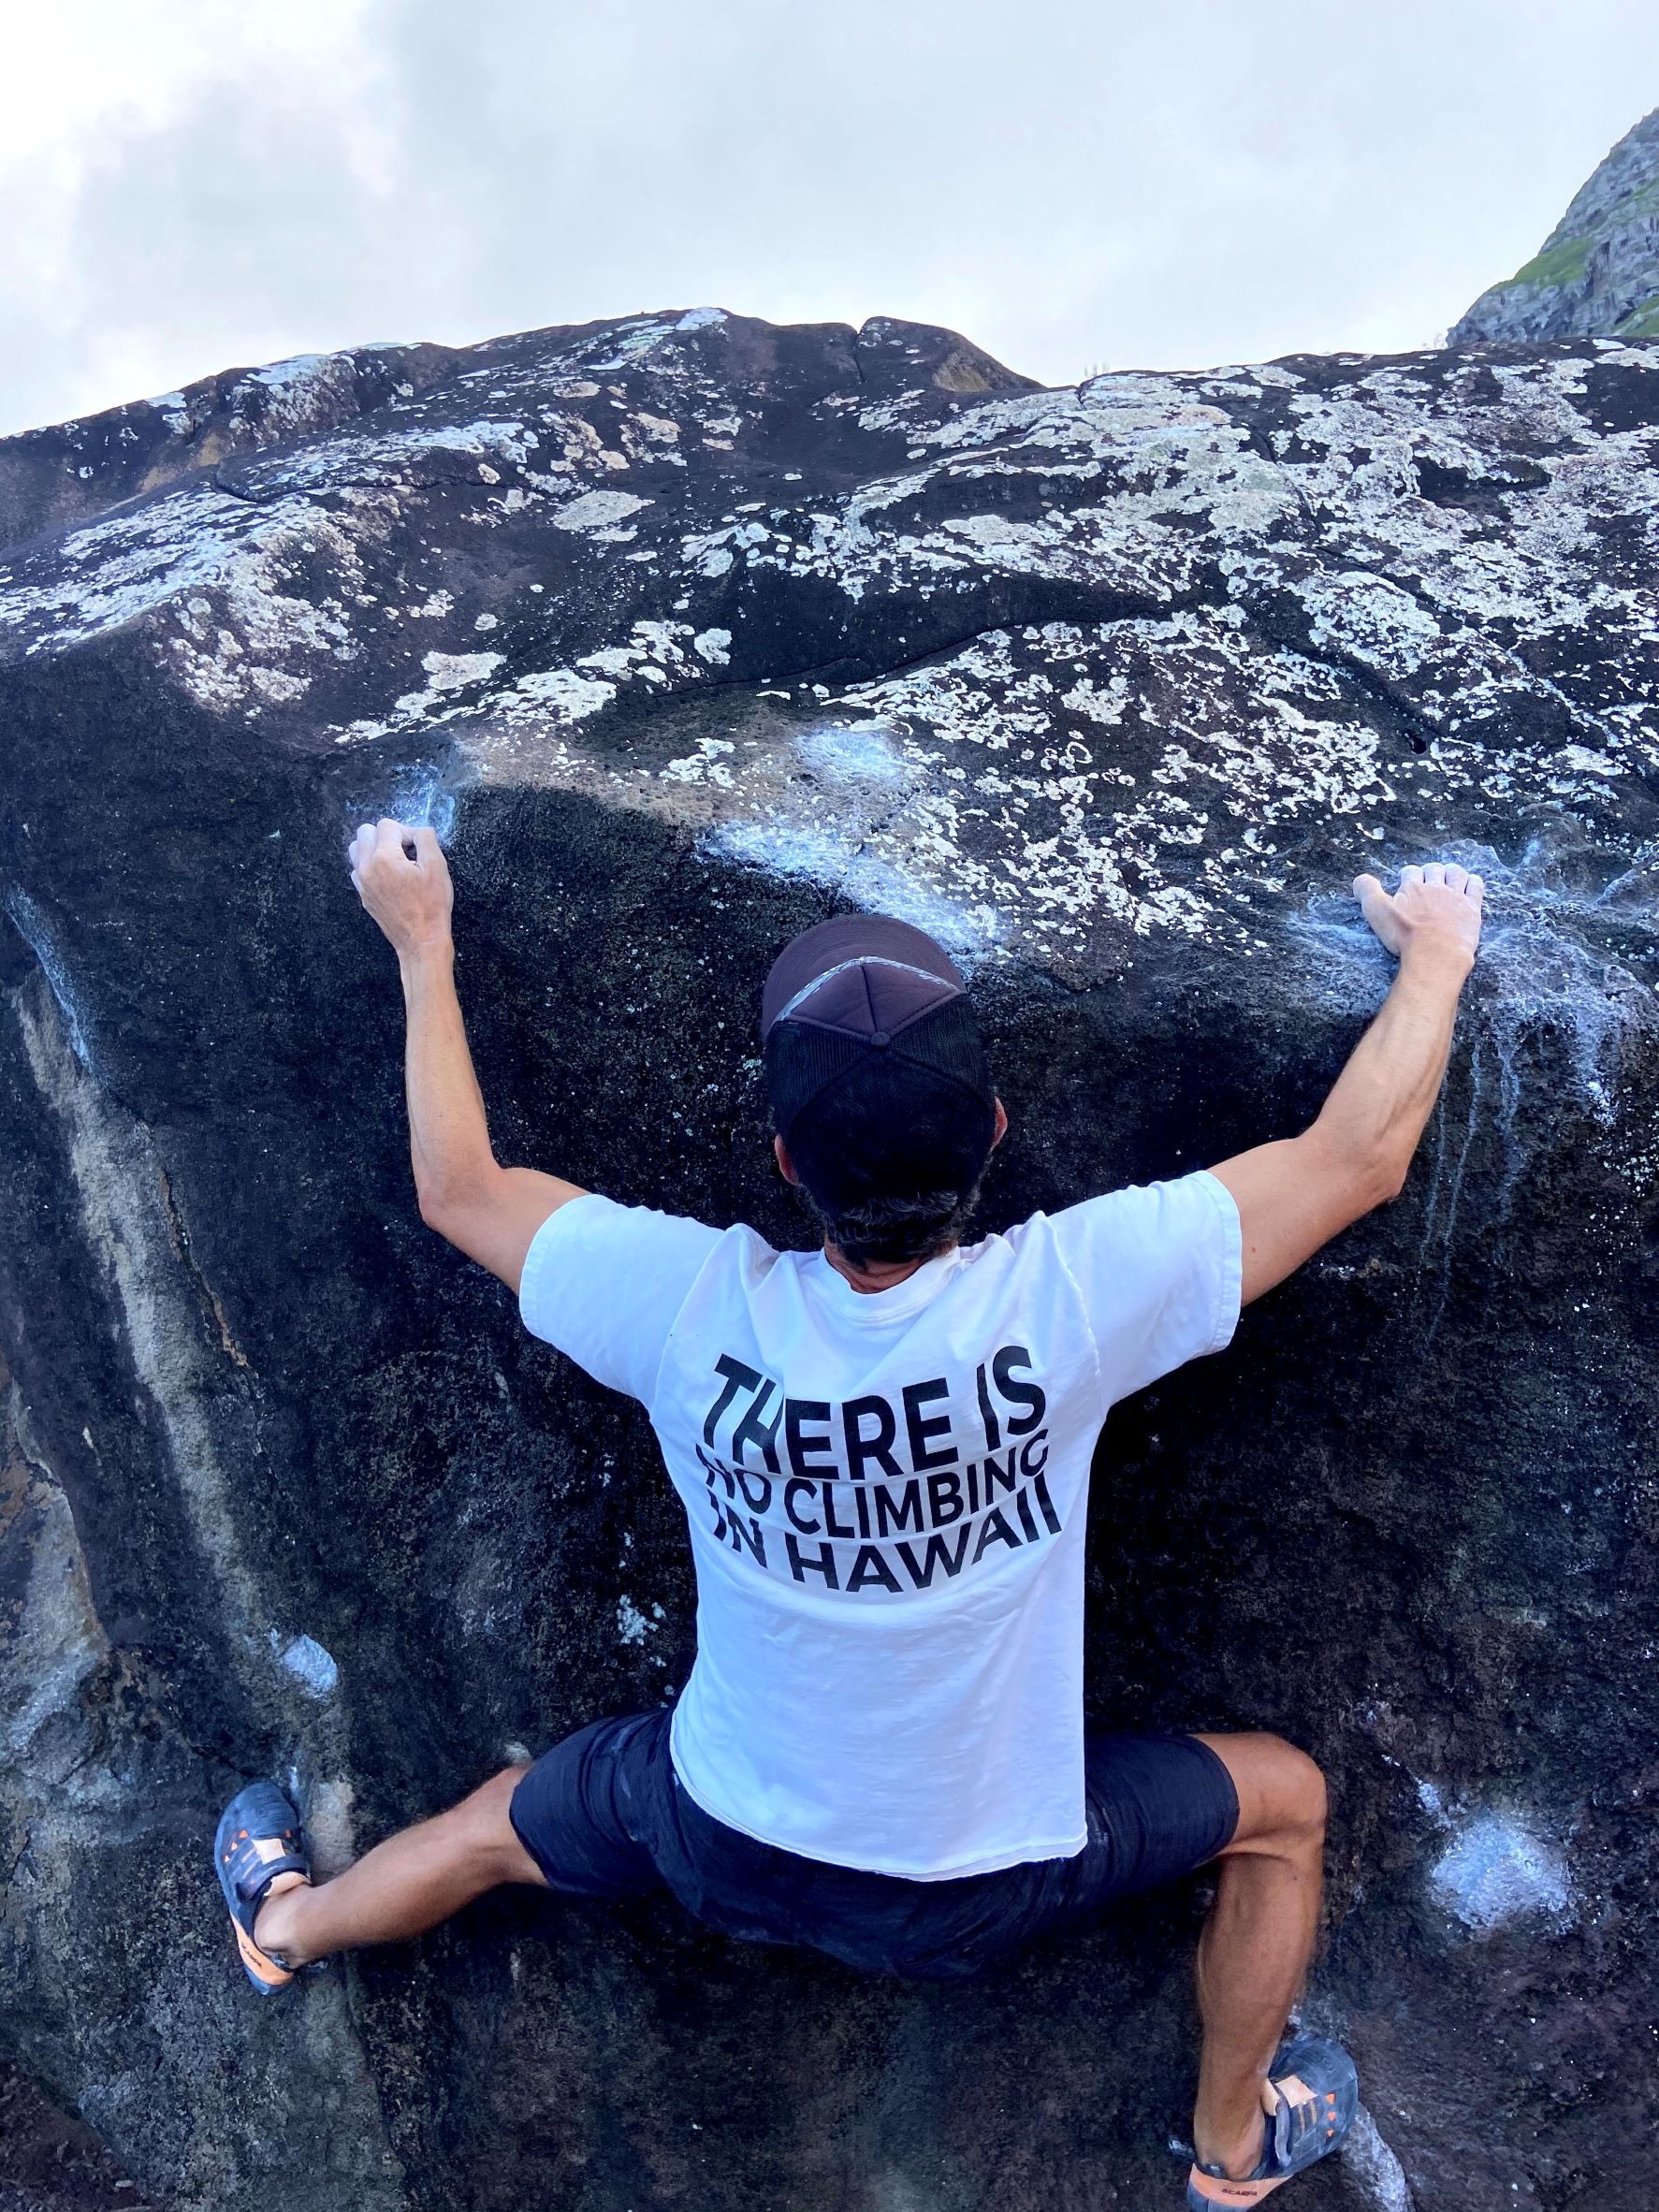 Close up of a person bouldering with a 'There is no Climbing in Hawaii' shirt